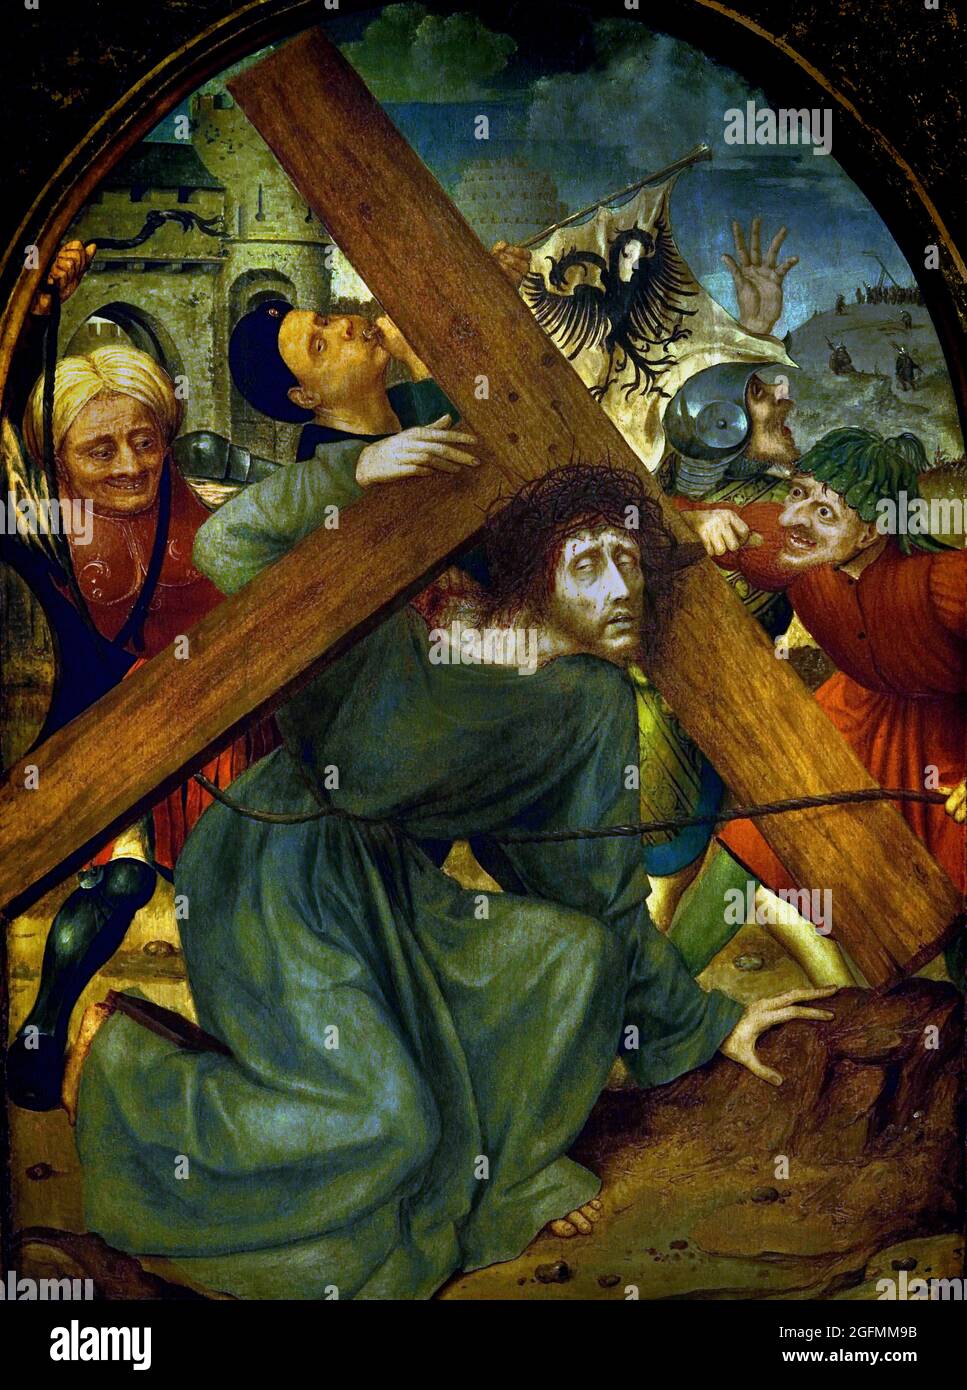 Christ Carrying the Cross, 1510 - 1515, Quinten Massijs,   oil on panel, 83×59cm,   ( Here Massijs, a leading artist in early 16th-century Antwerp, paints an intense picture of Jesus’s suffering. Jesus appears close to the foreground, connecting almost tangibly with the viewer: bloodied and bowed under the weight of the cross. This penetrating depiction helped worshippers empathise with Jesus’s pain. Dutch, The Netherlands .) Stock Photo